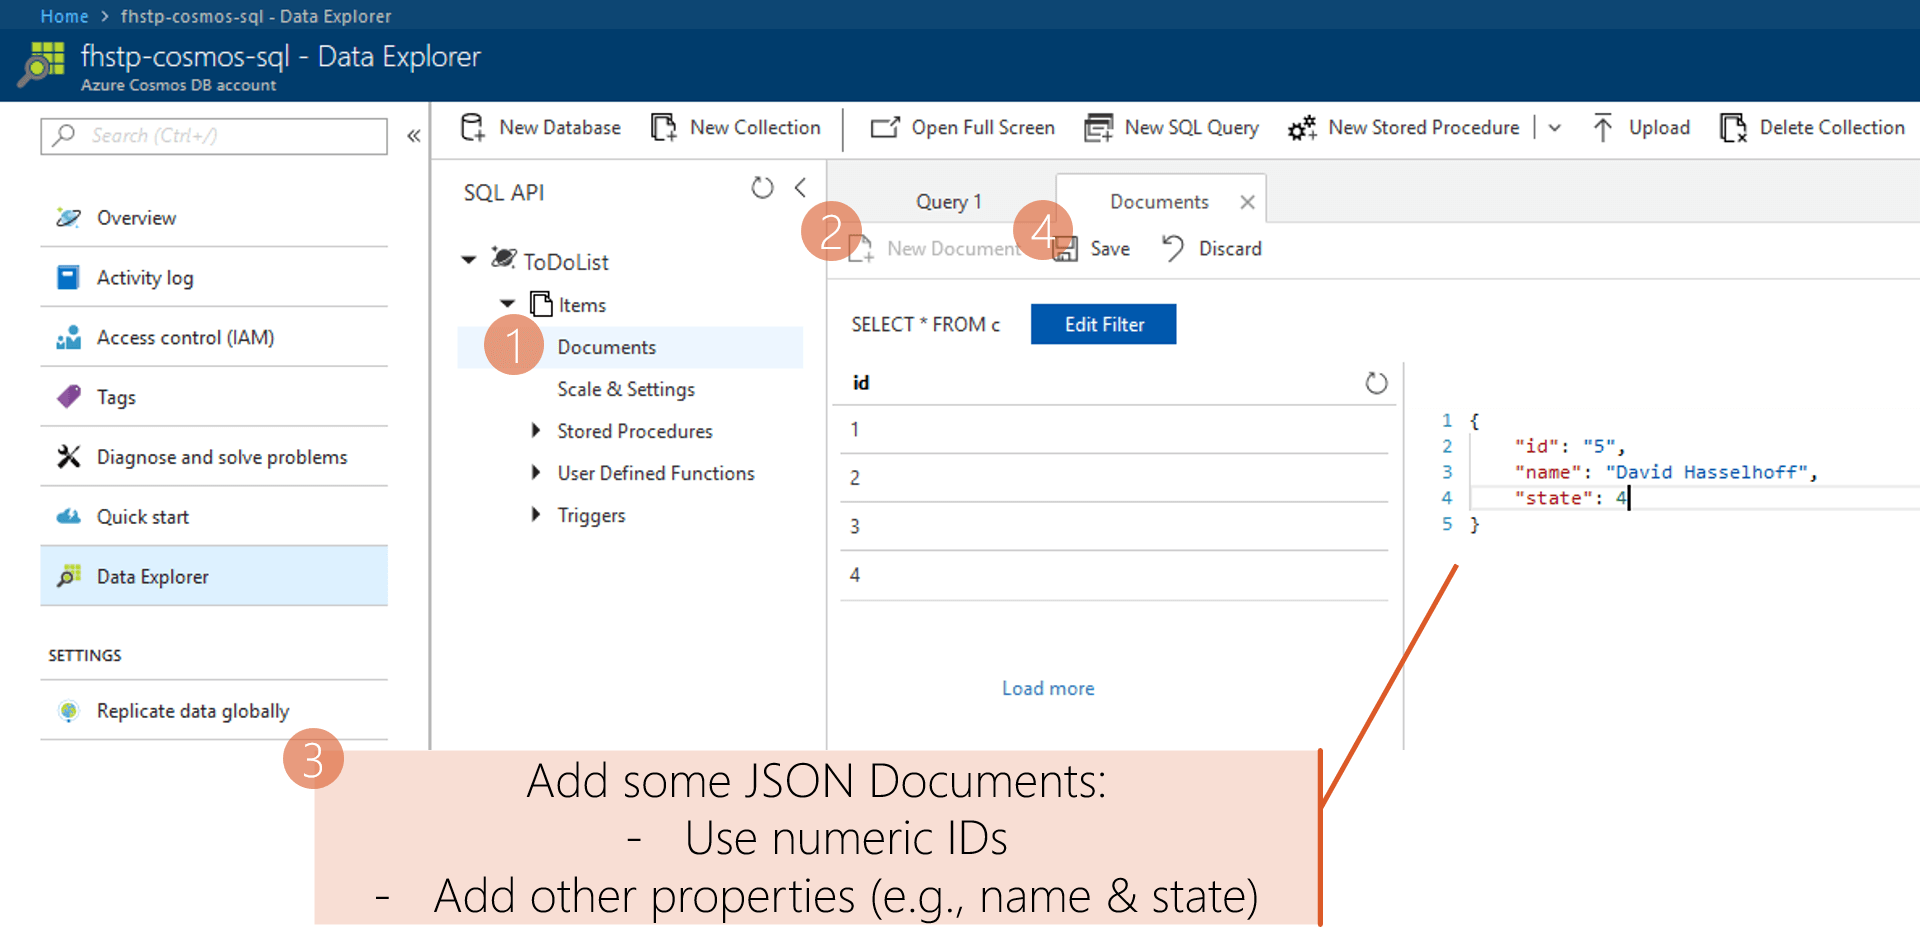 Steps to add documents to the Azure Cosmos DB